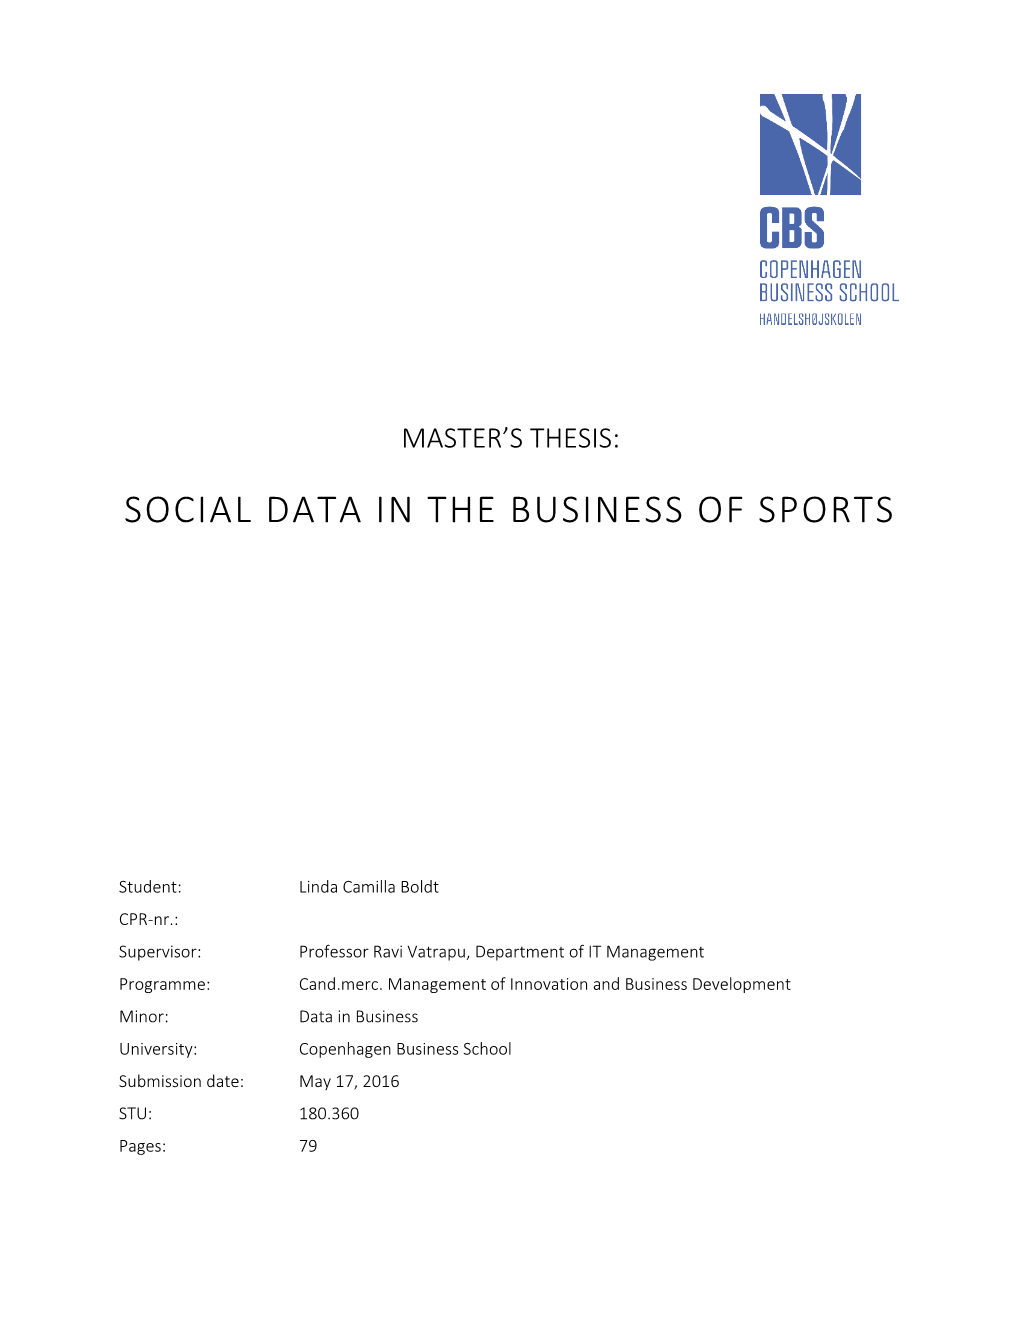 Social Data in the Business of Sports